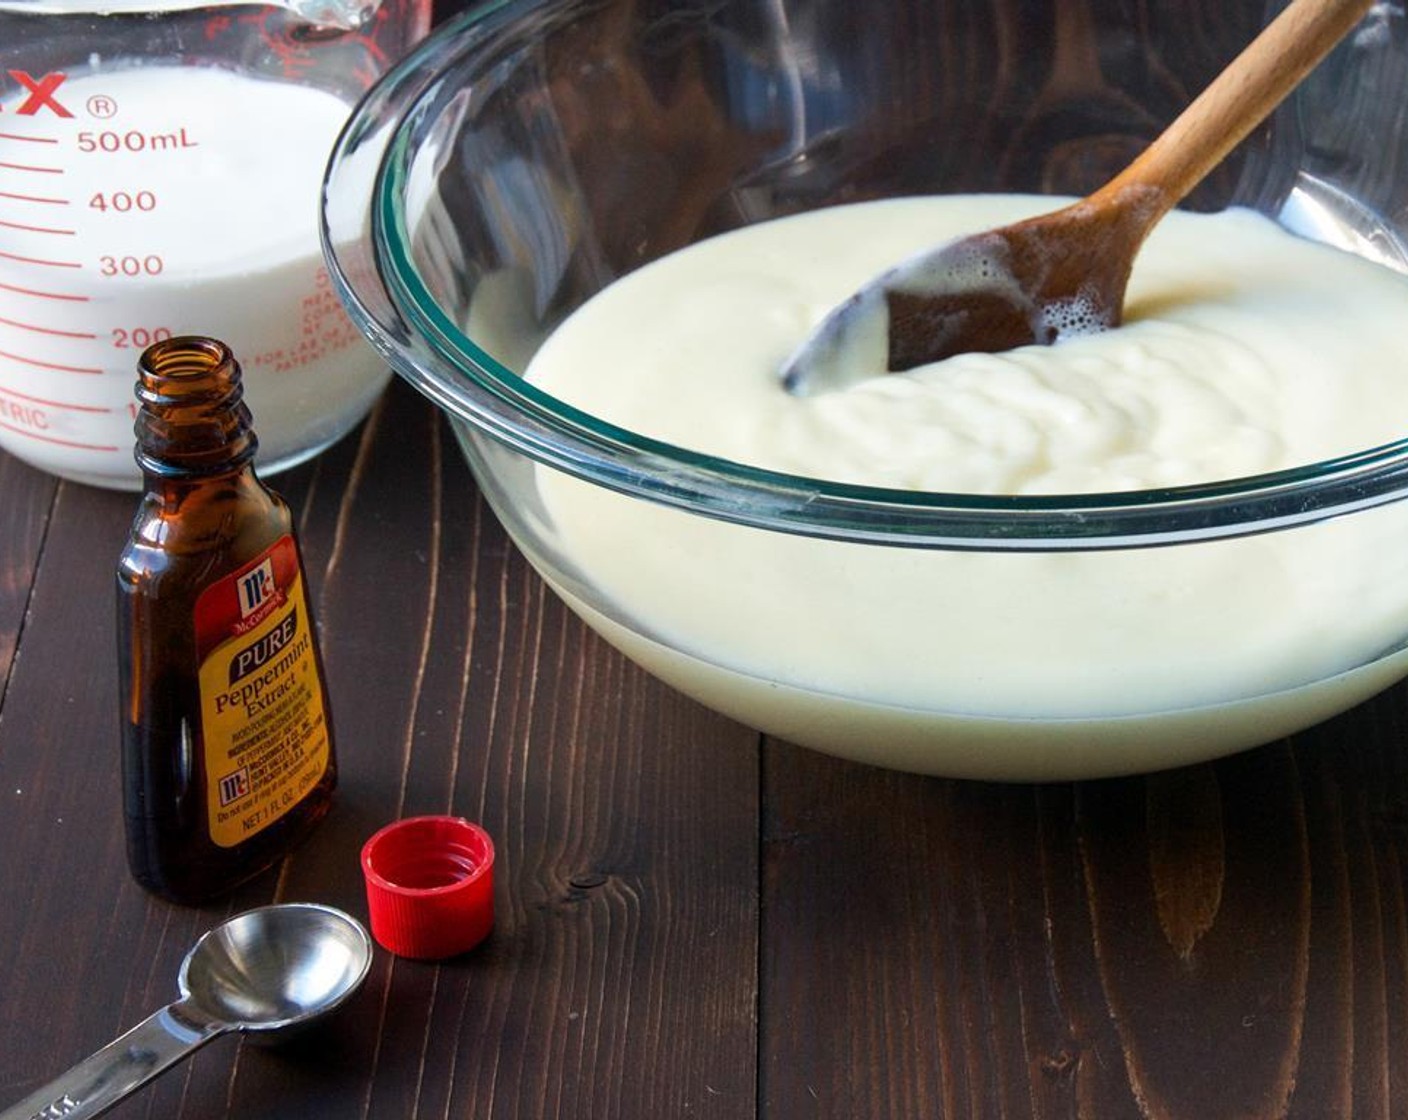 step 6 Stir in the Heavy Cream (1 cup) and Peppermint Extract (1/2 Tbsp). Cover with plastic wrap and refrigerate until very cold, at least 2 hours or overnight.